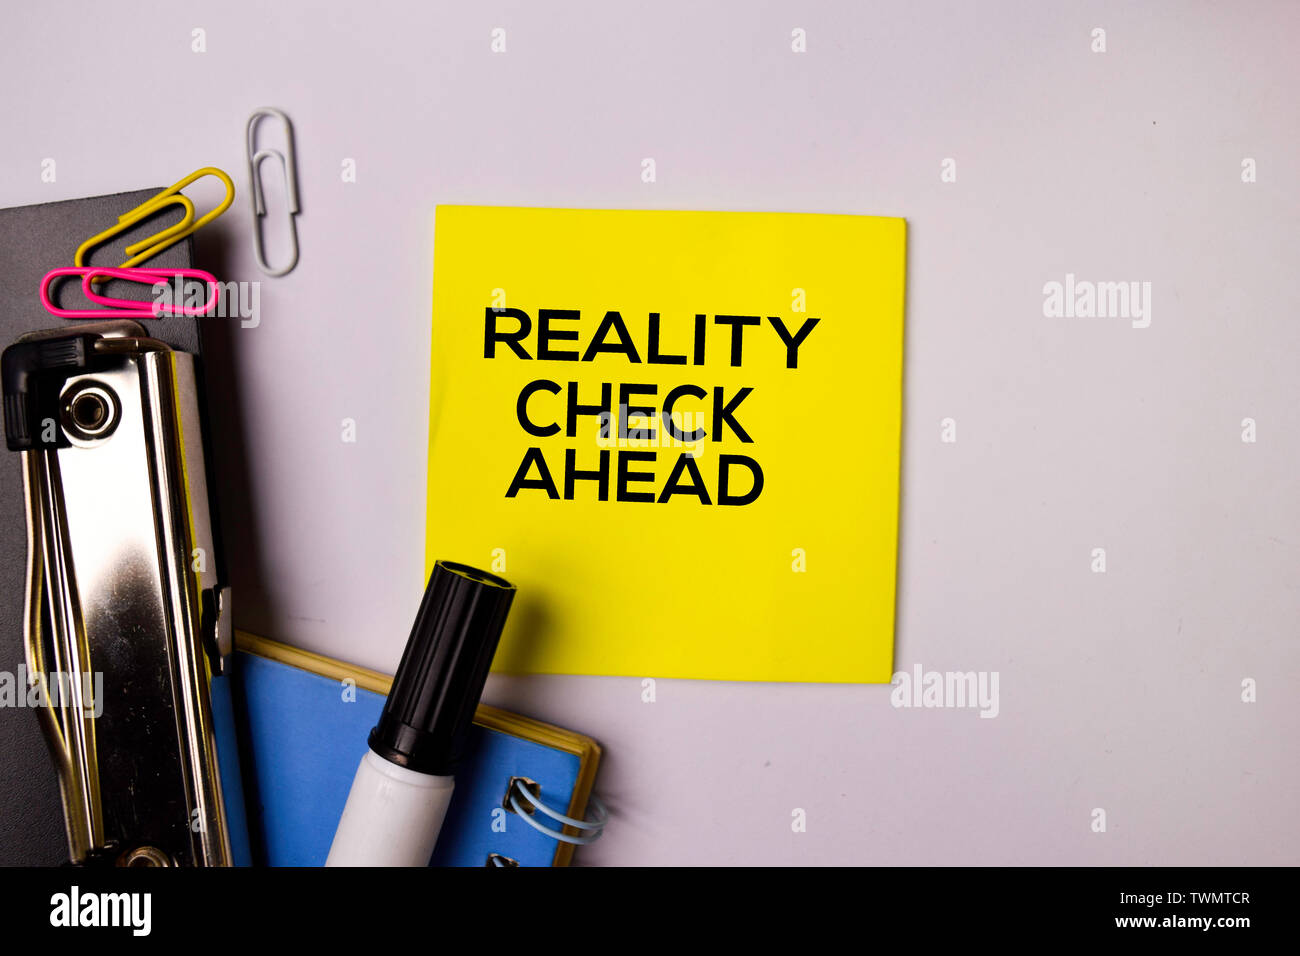 Reality Check Ahead on sticky notes isolated on white background. Stock Photo